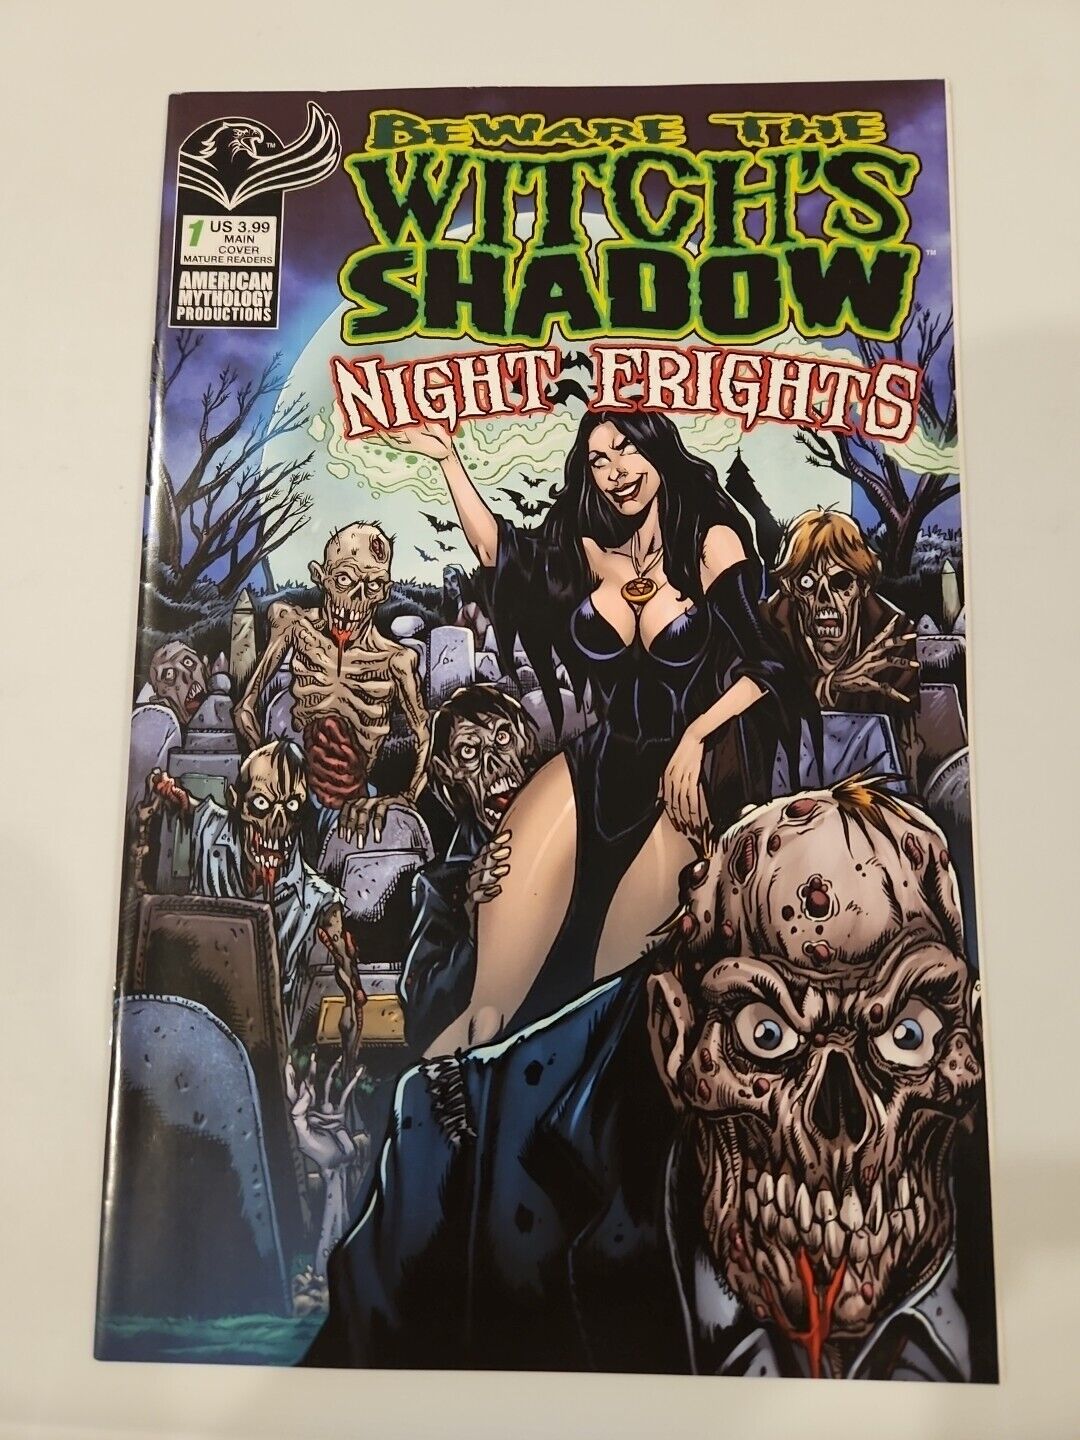 Between The Witchs Shadow Night Frights #1 American Mytholgy NM Combine Shipping